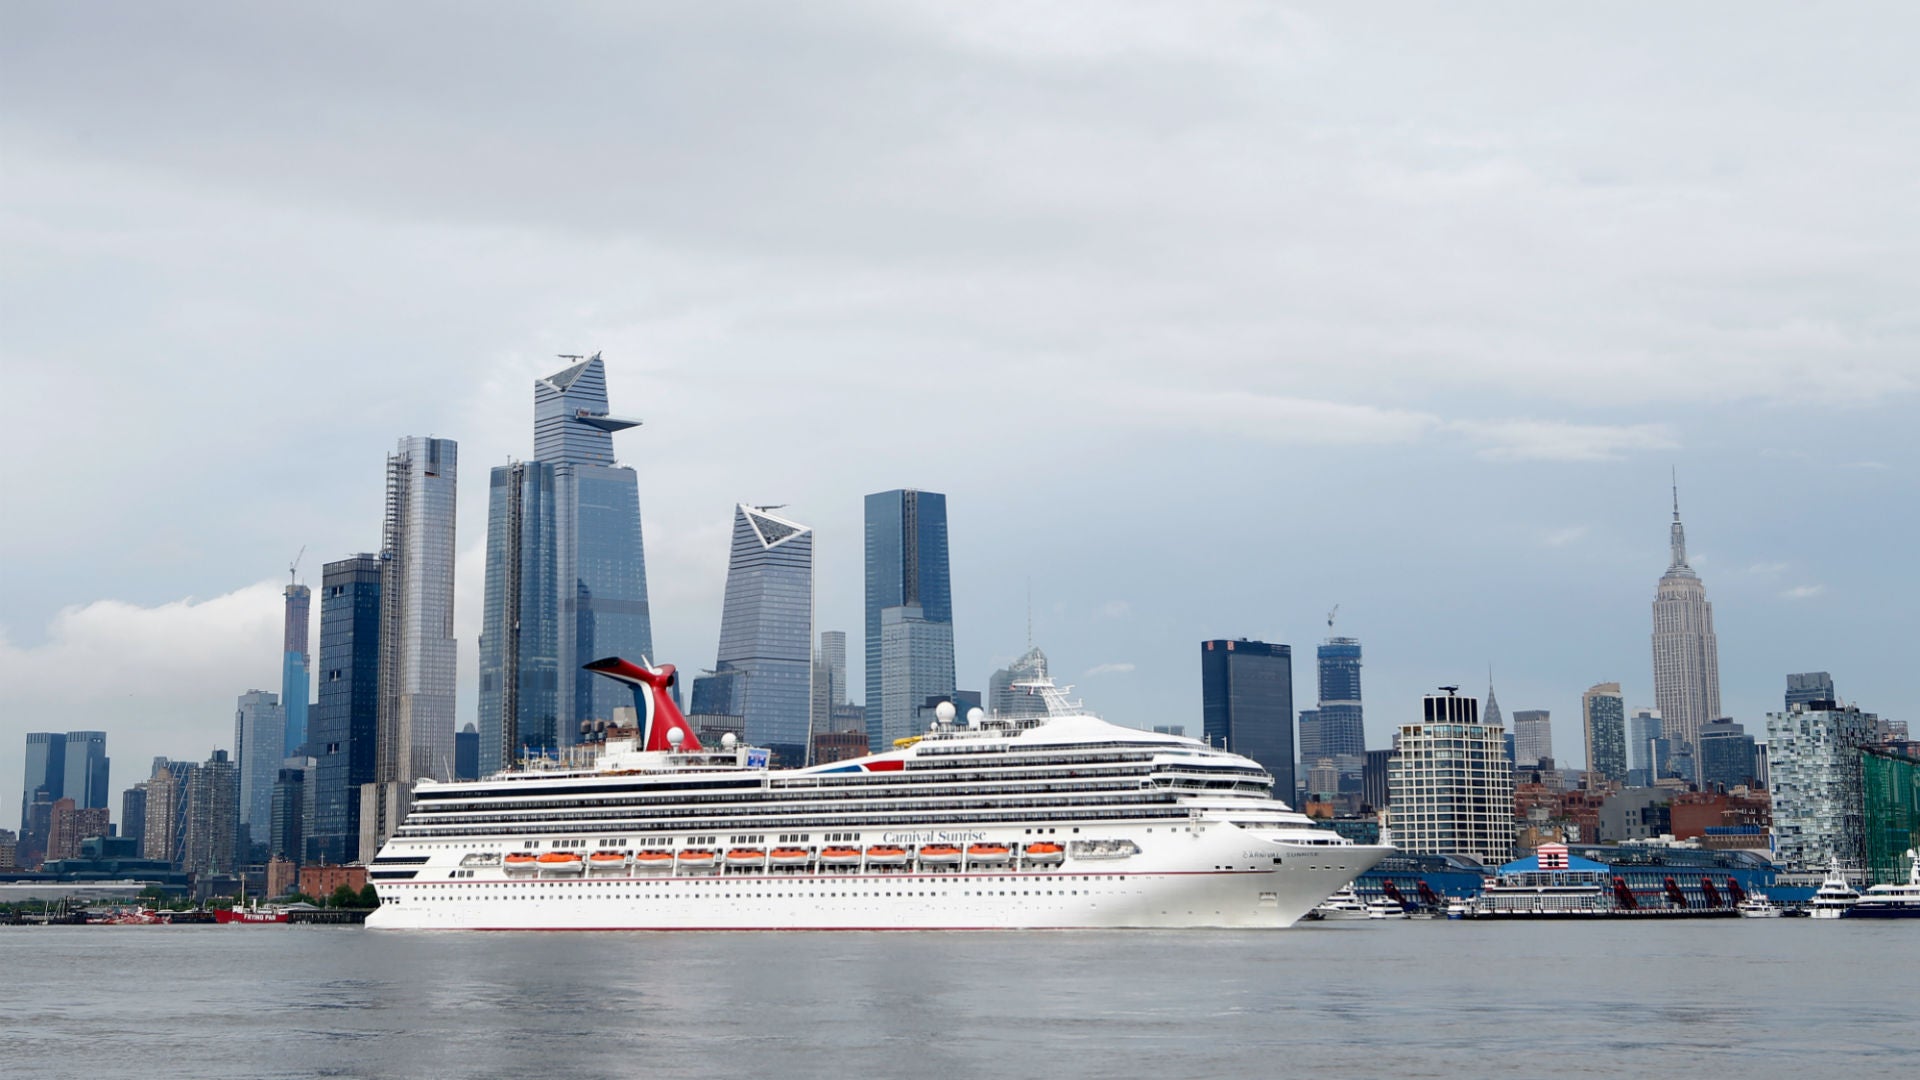 Carnival Cruise Ship Fleet Pollutes Almost 10 Times More Than All Cars in Europe: Study